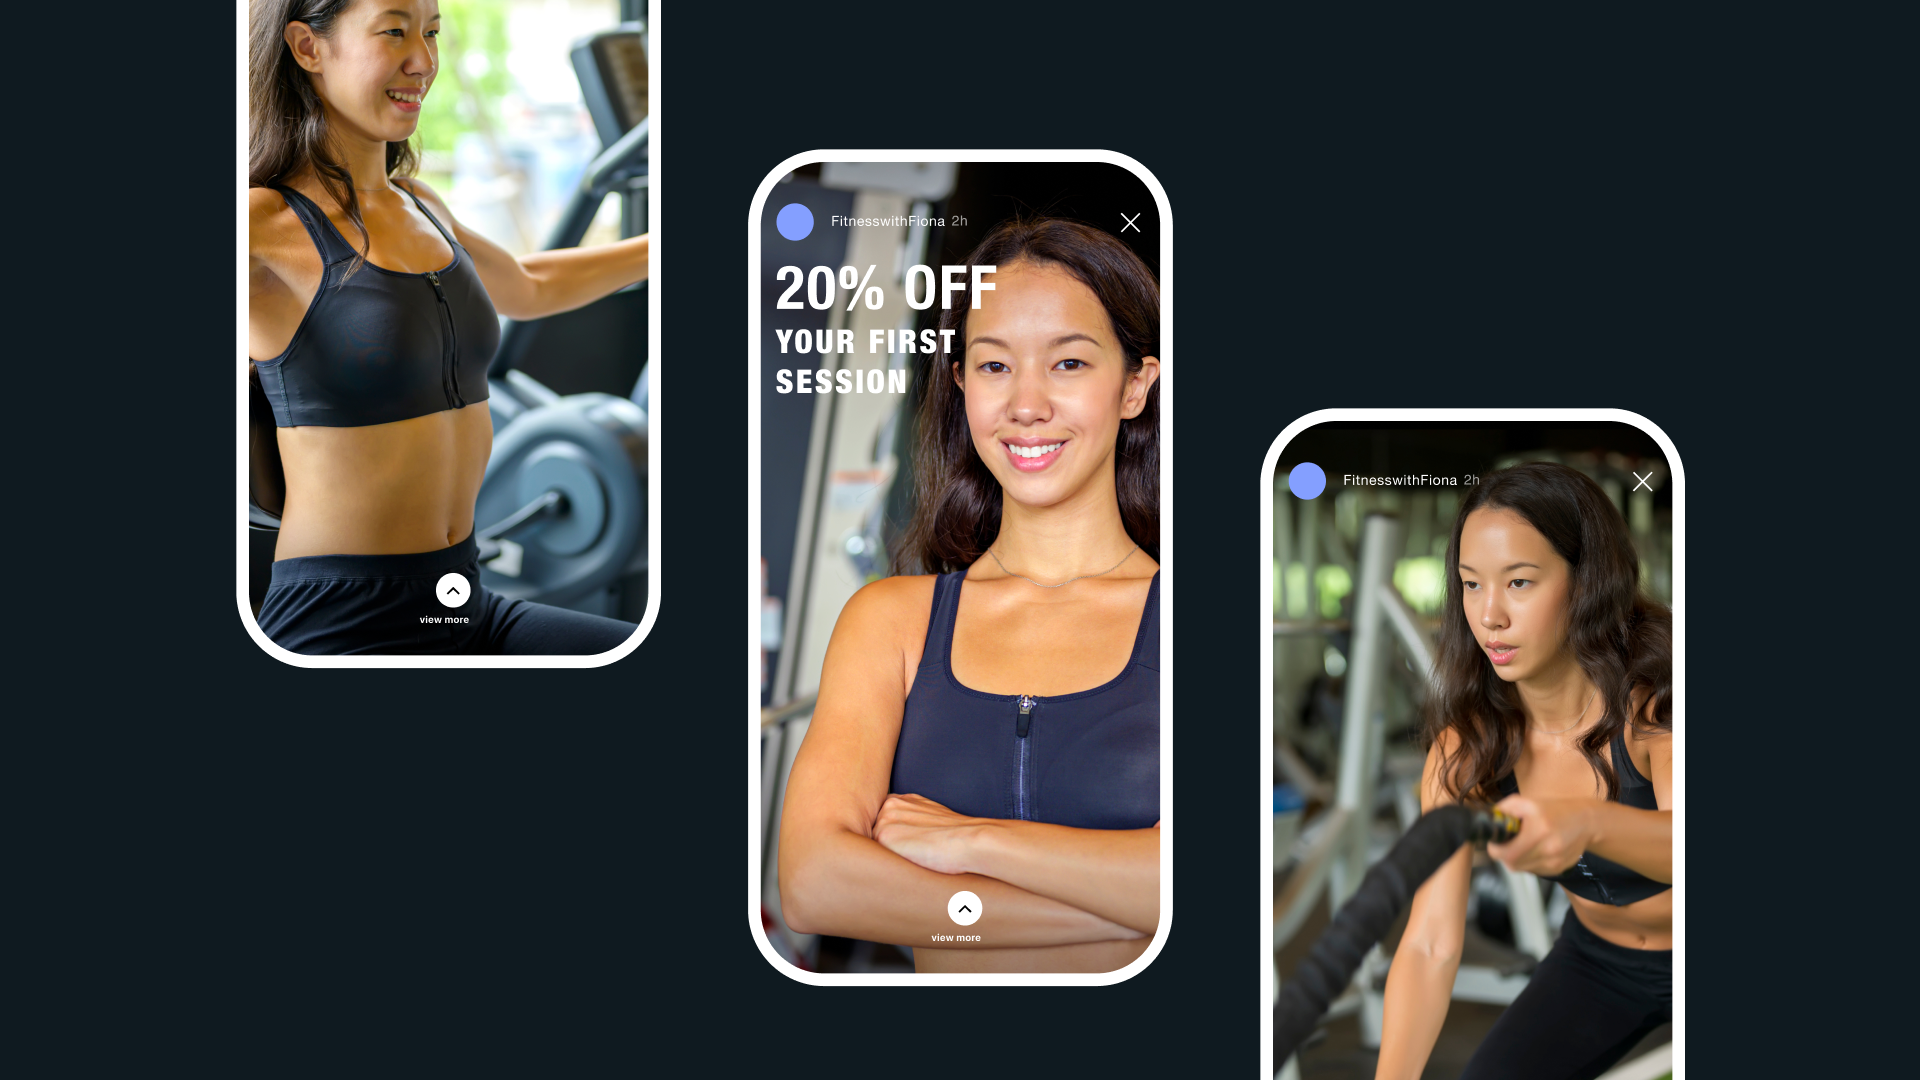 Mobile workout app with 20% off first sesssion.